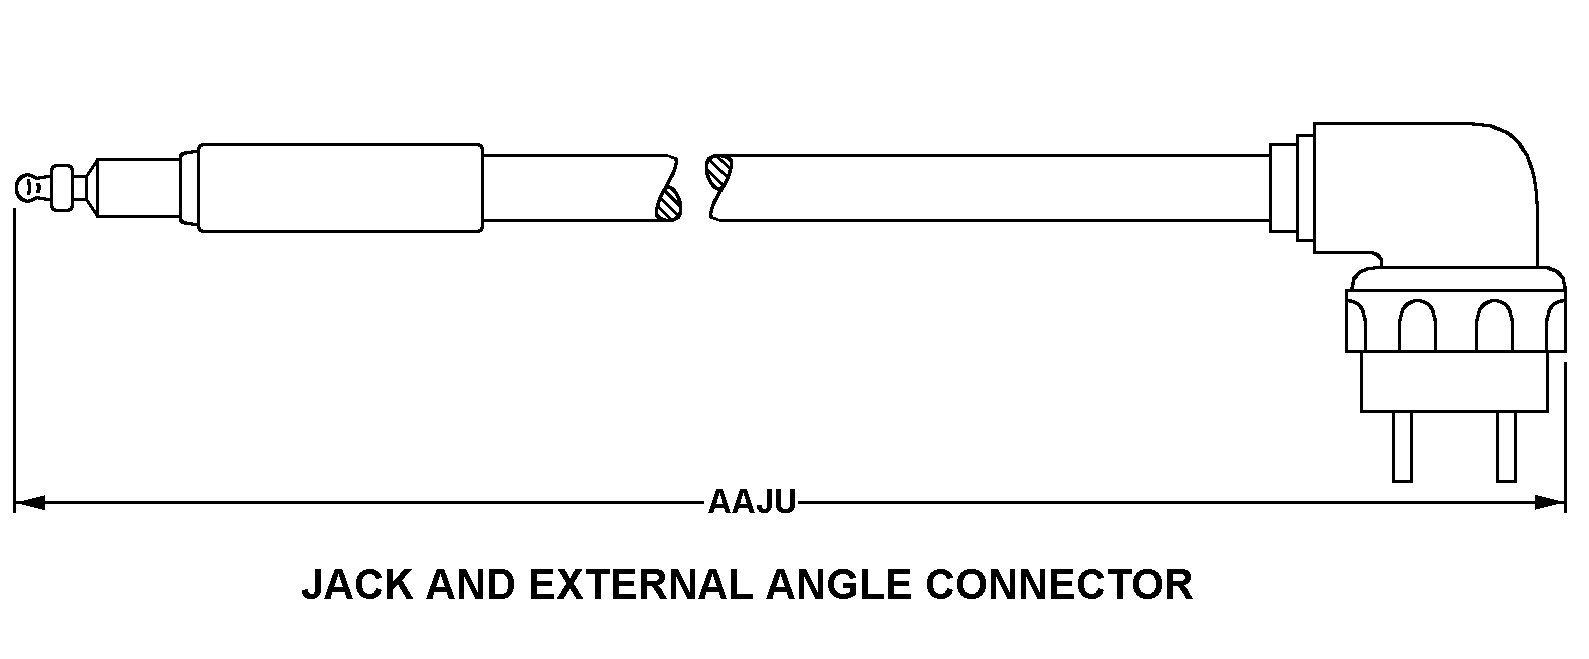 JACK AND EXTERNAL ANGLE CONNECTOR style nsn 5995-01-301-5830